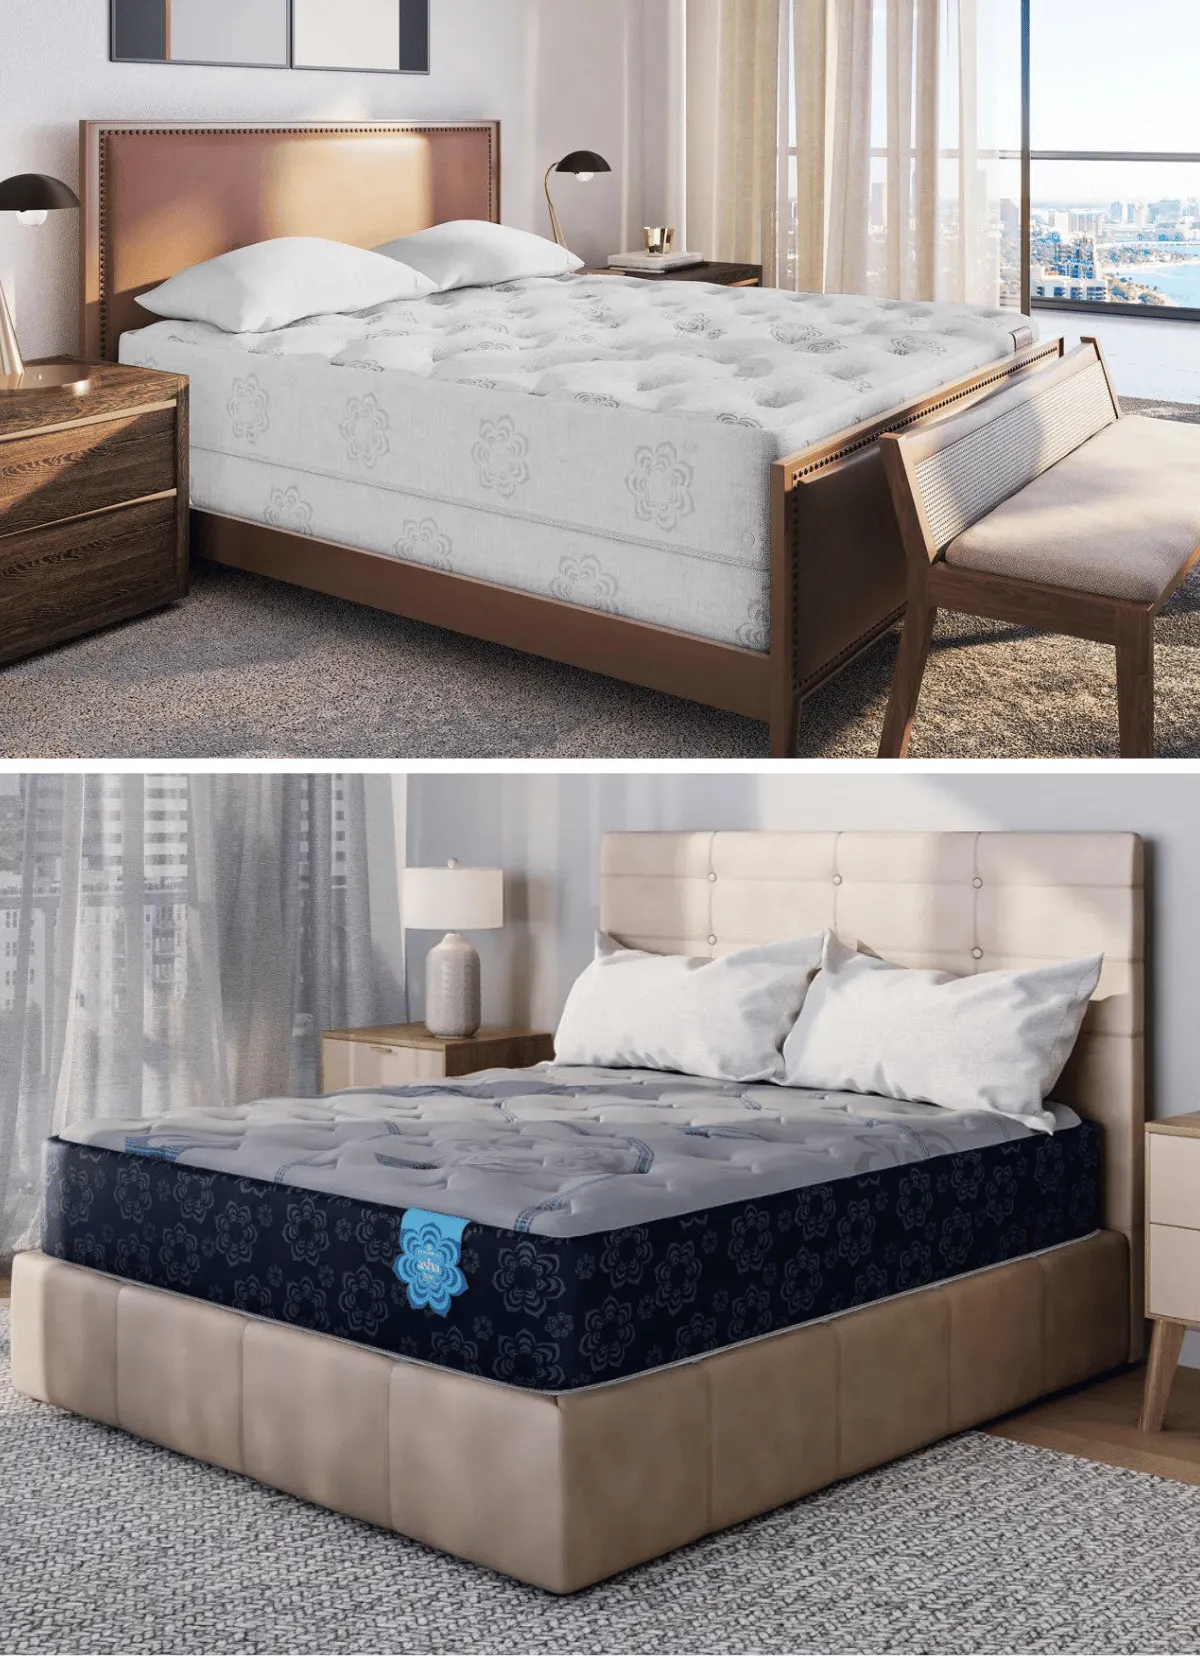 "Is the Prana Mattress Worth Your Investment? Find Out Now!"